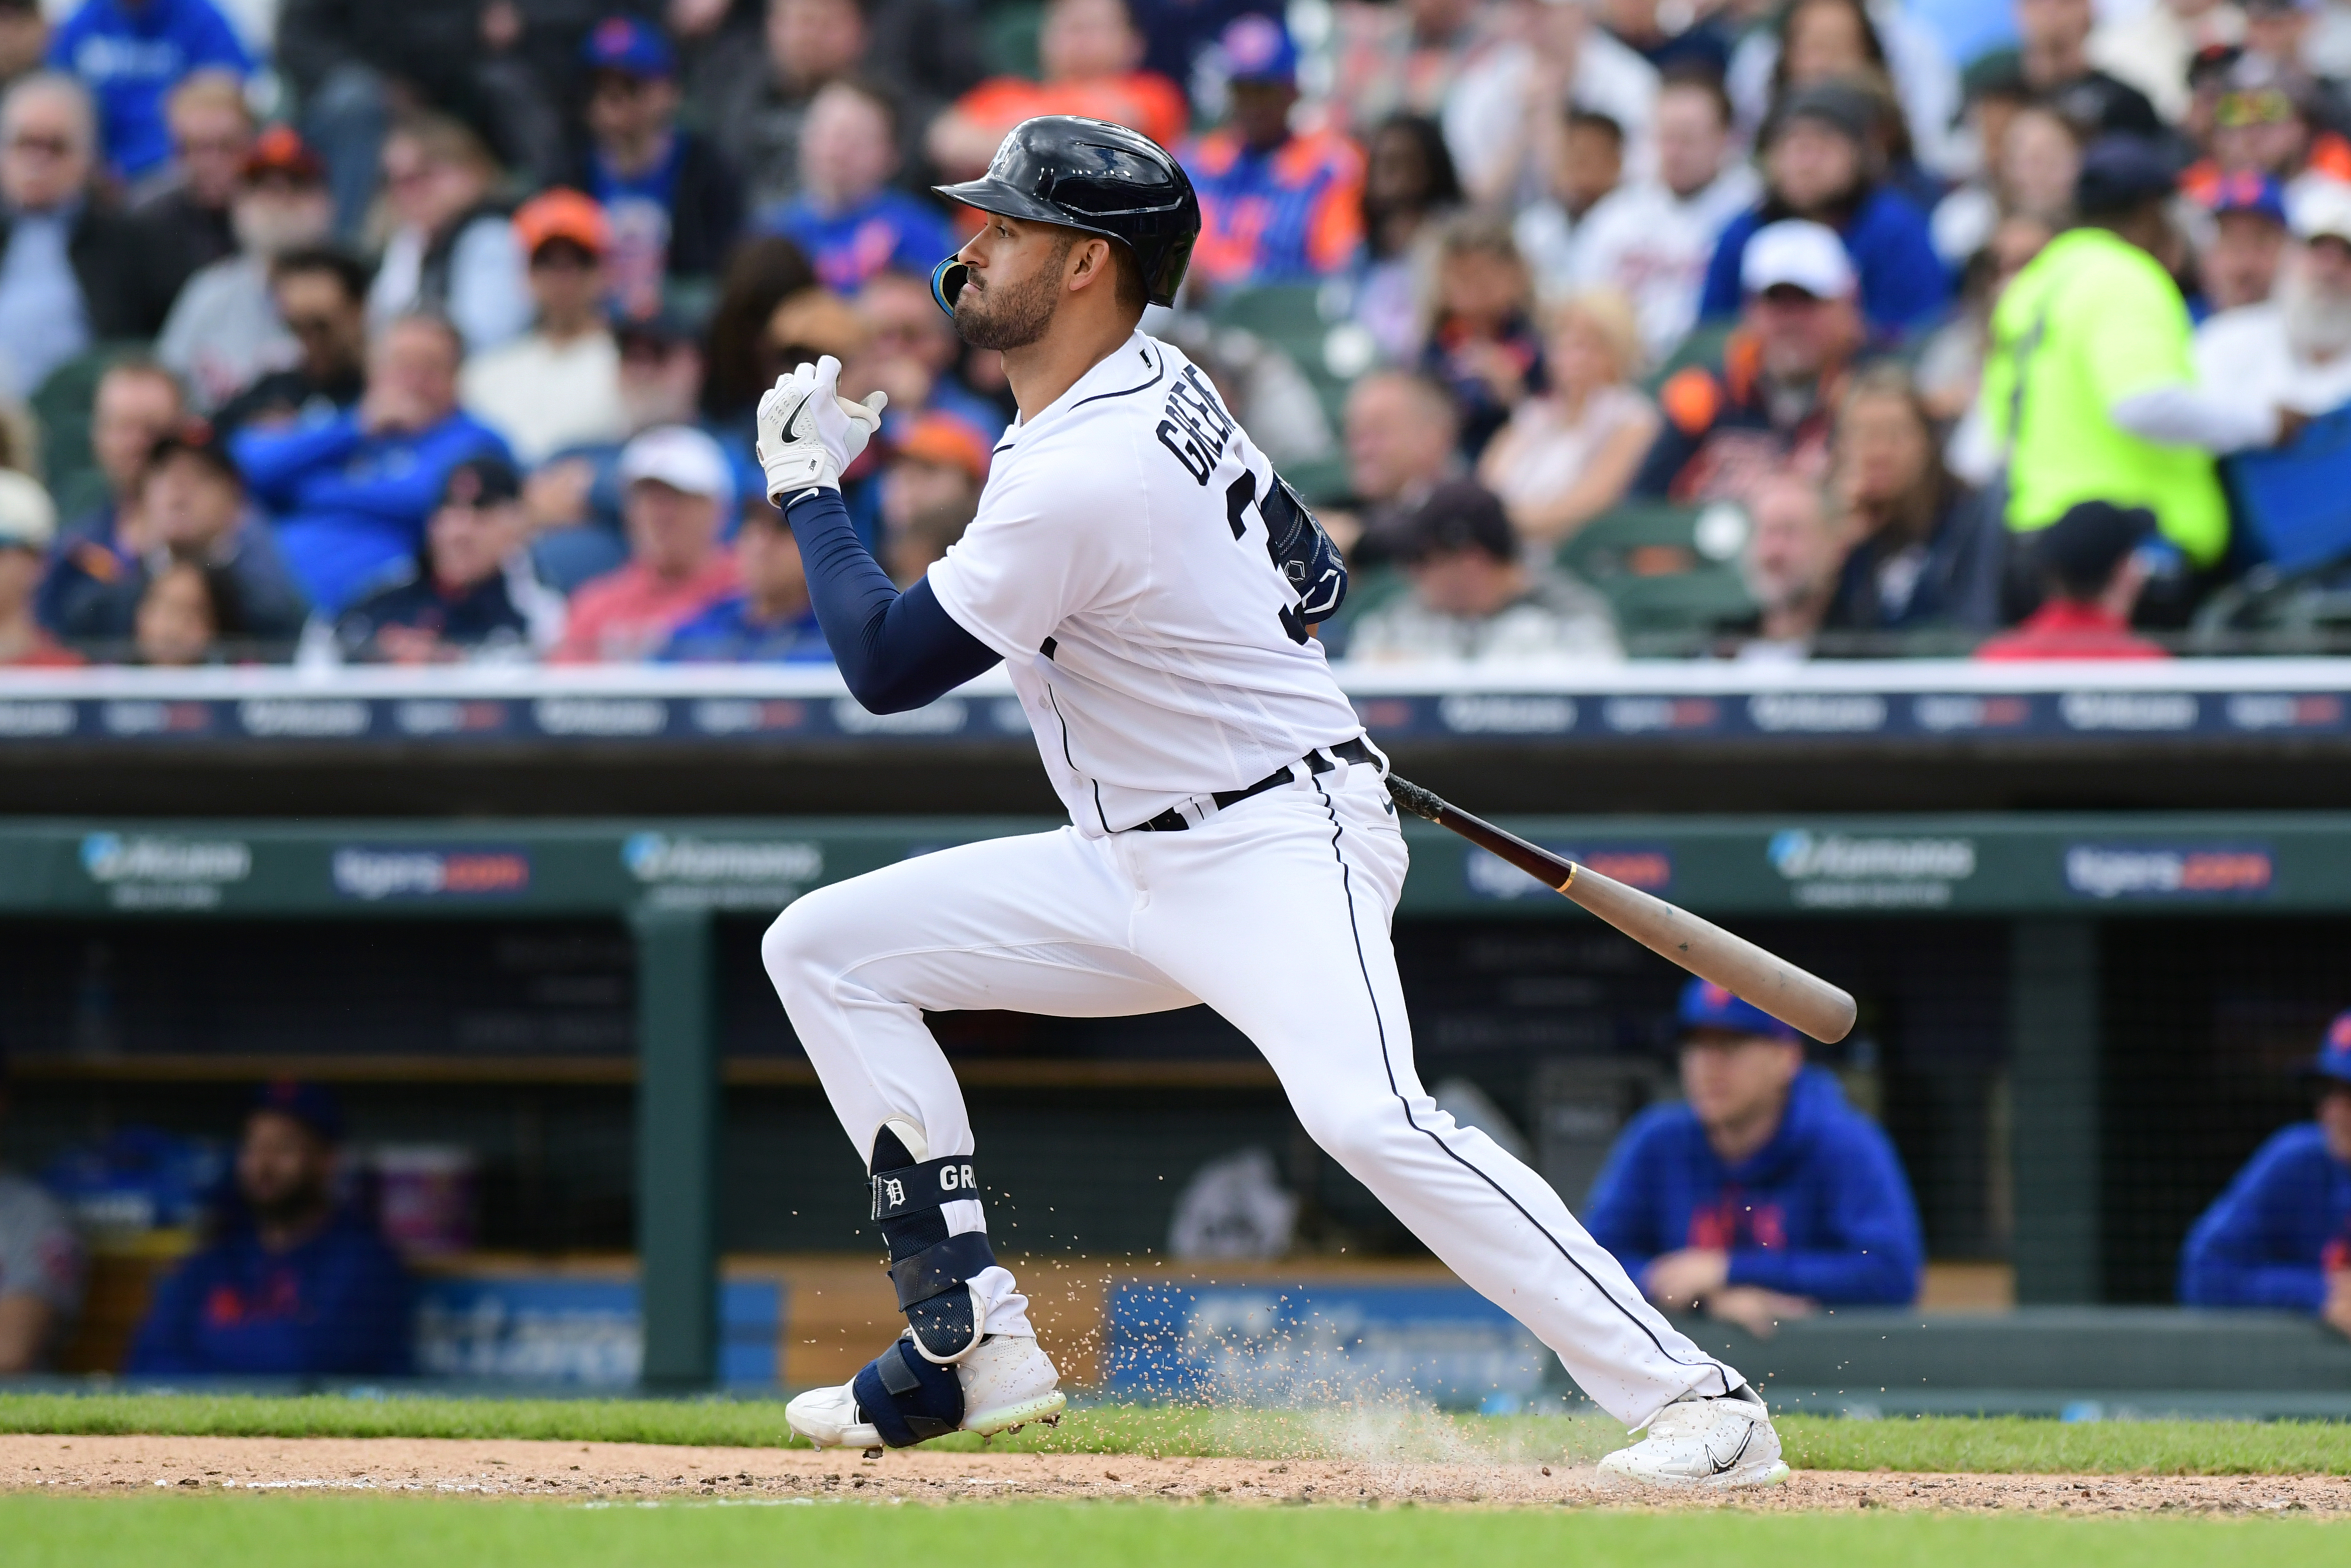 2023 MLB Fantasy: Tigers OF Riley Greene is Off to a Hot Start This Spring  - New Baseball Media